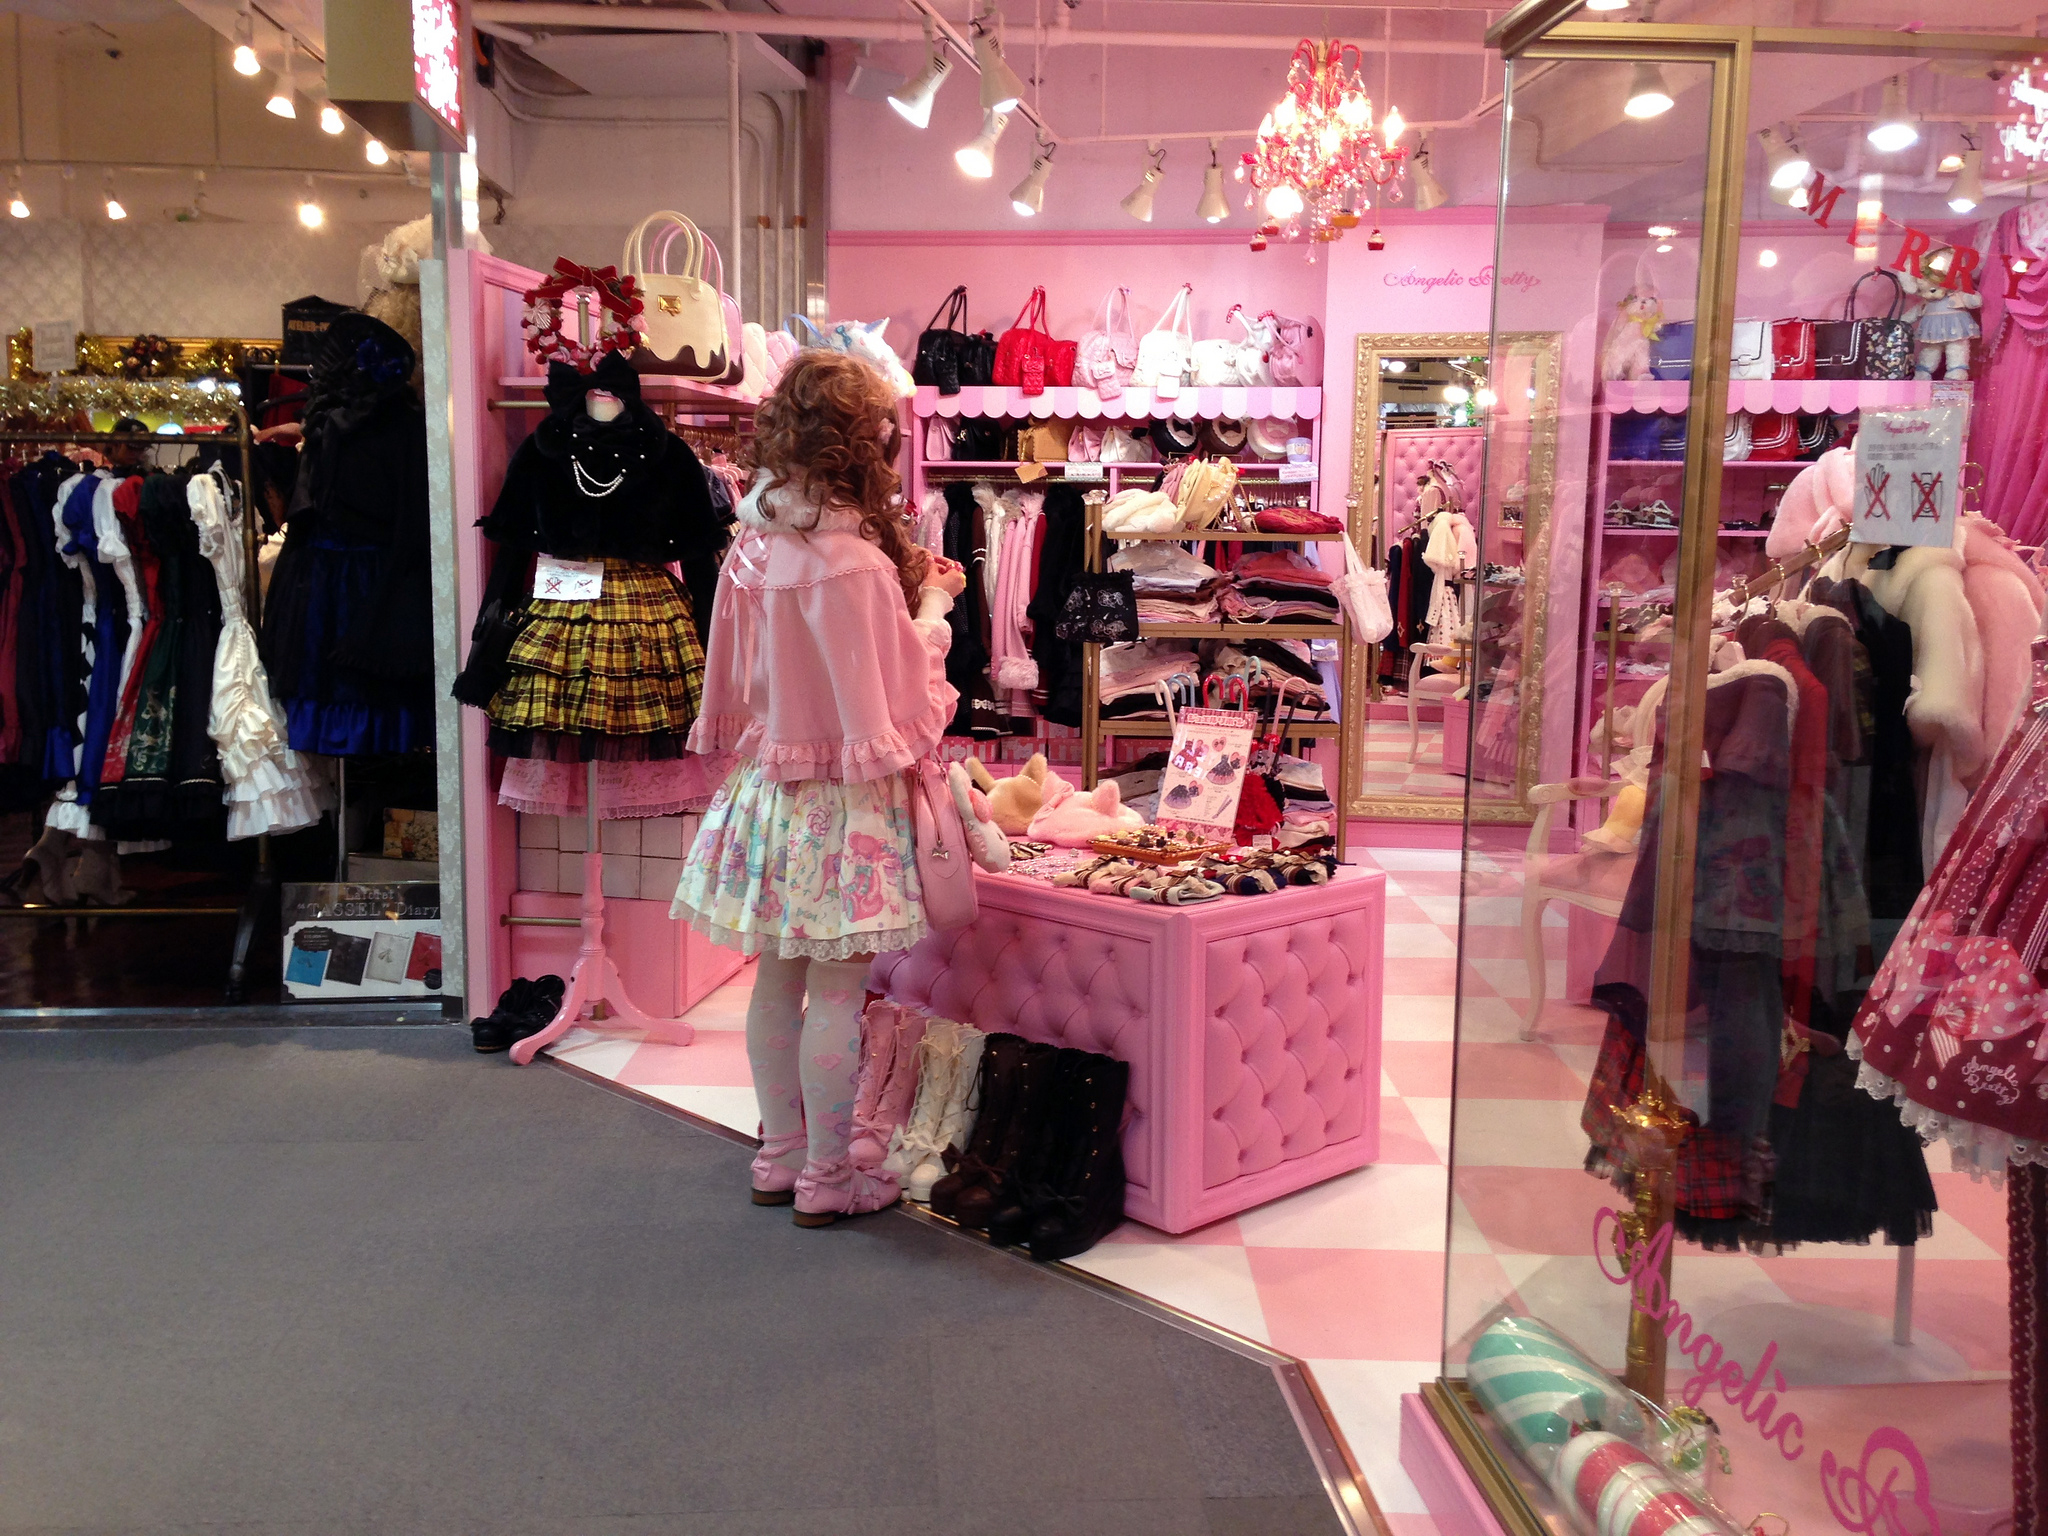 Angelic Pretty at Laforet in Tokyo. Photo by alphacityguides.